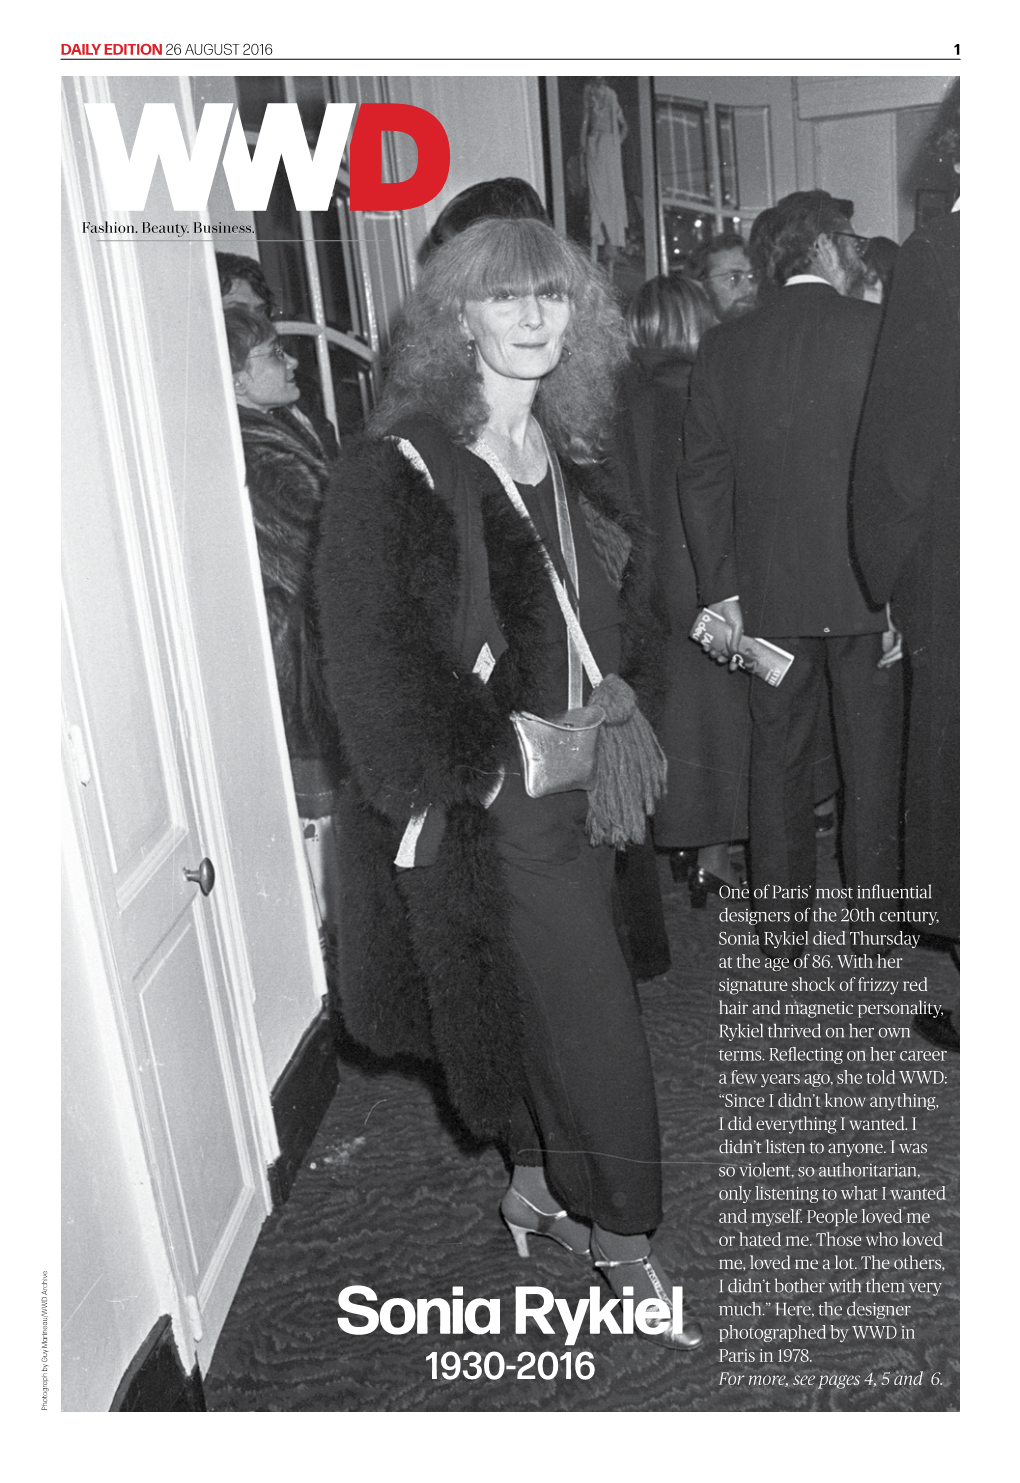 Sonia Rykiel 1930-2016 for More, See Pages 4,5And 6